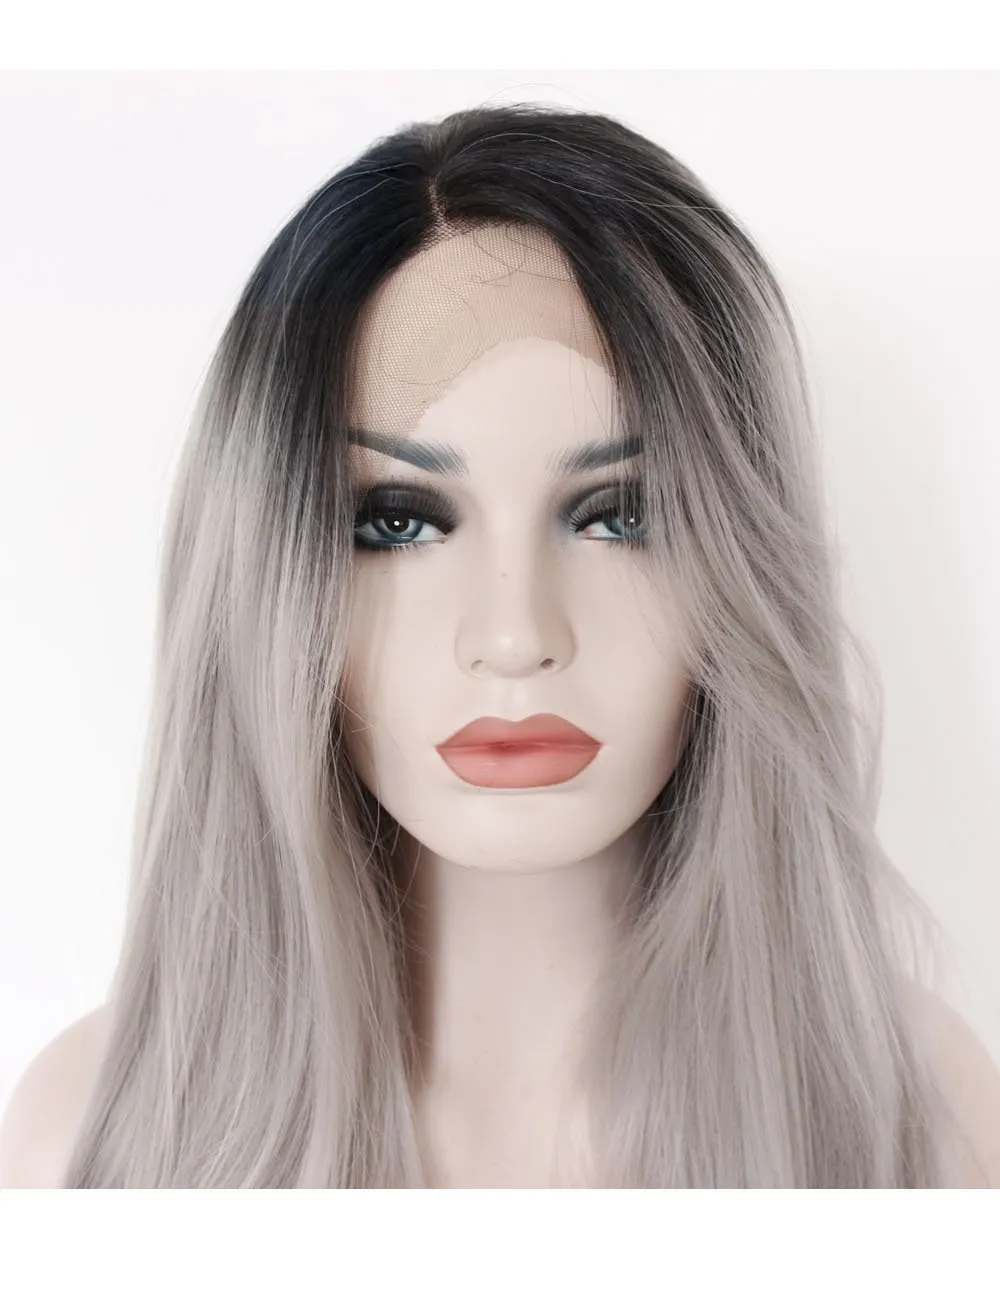 Ombre Gray 2 Tones Synthetic Lace Front Wig Dark Roots Long Natural Straight Silver Grey Replacement Hair Wigs For Women Heat Resistant Fibe